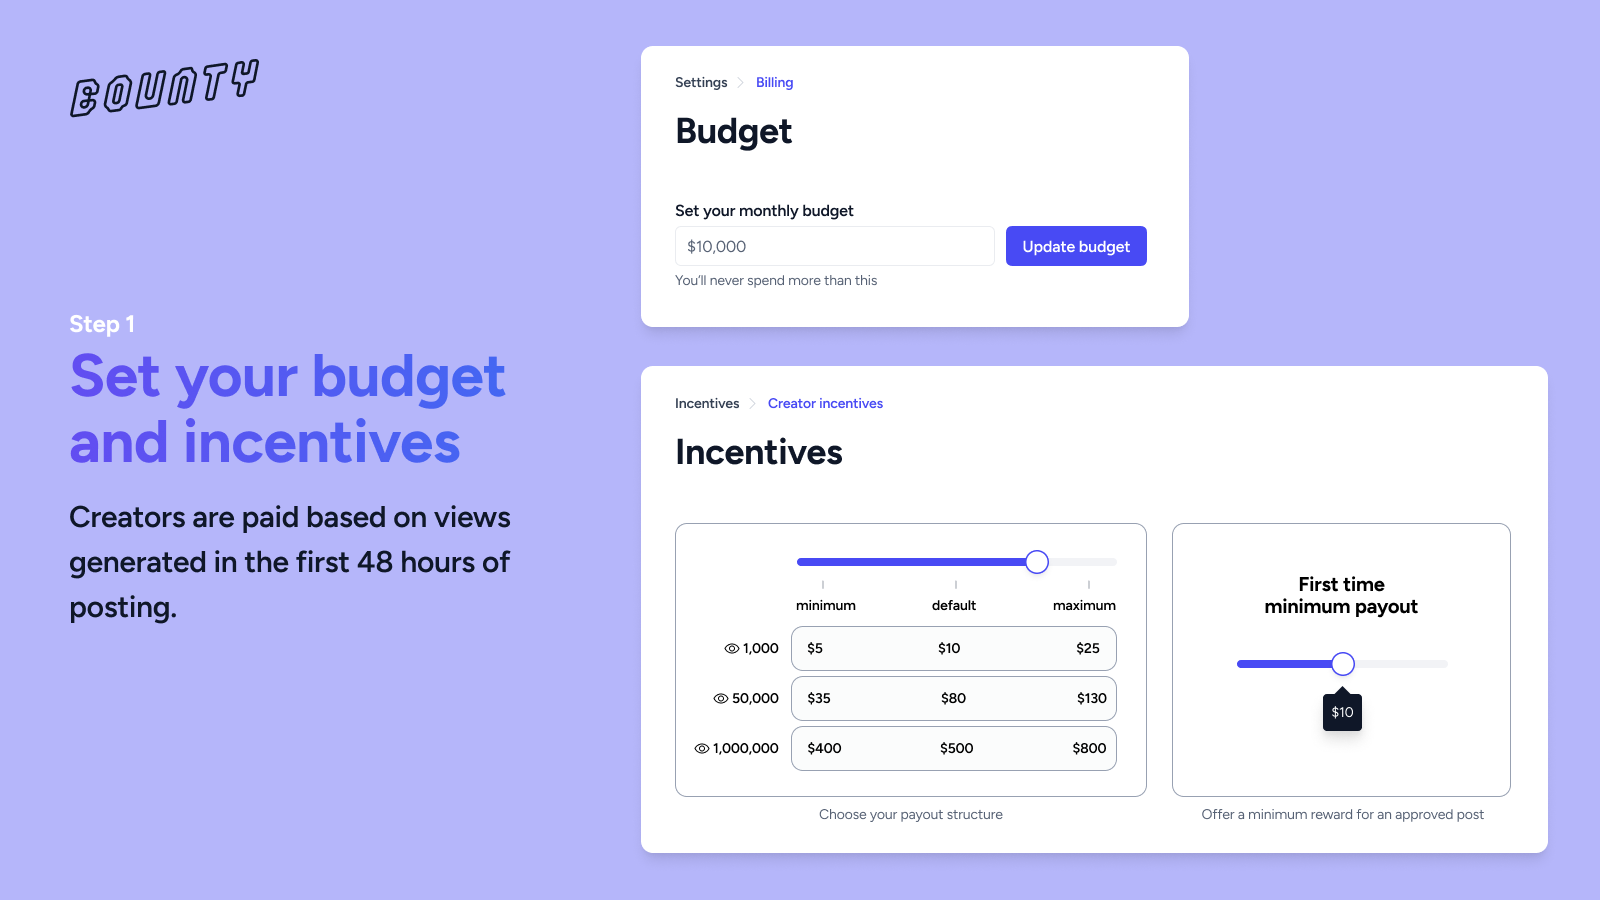 Step 1 - Set your monthly budget and creator incentives